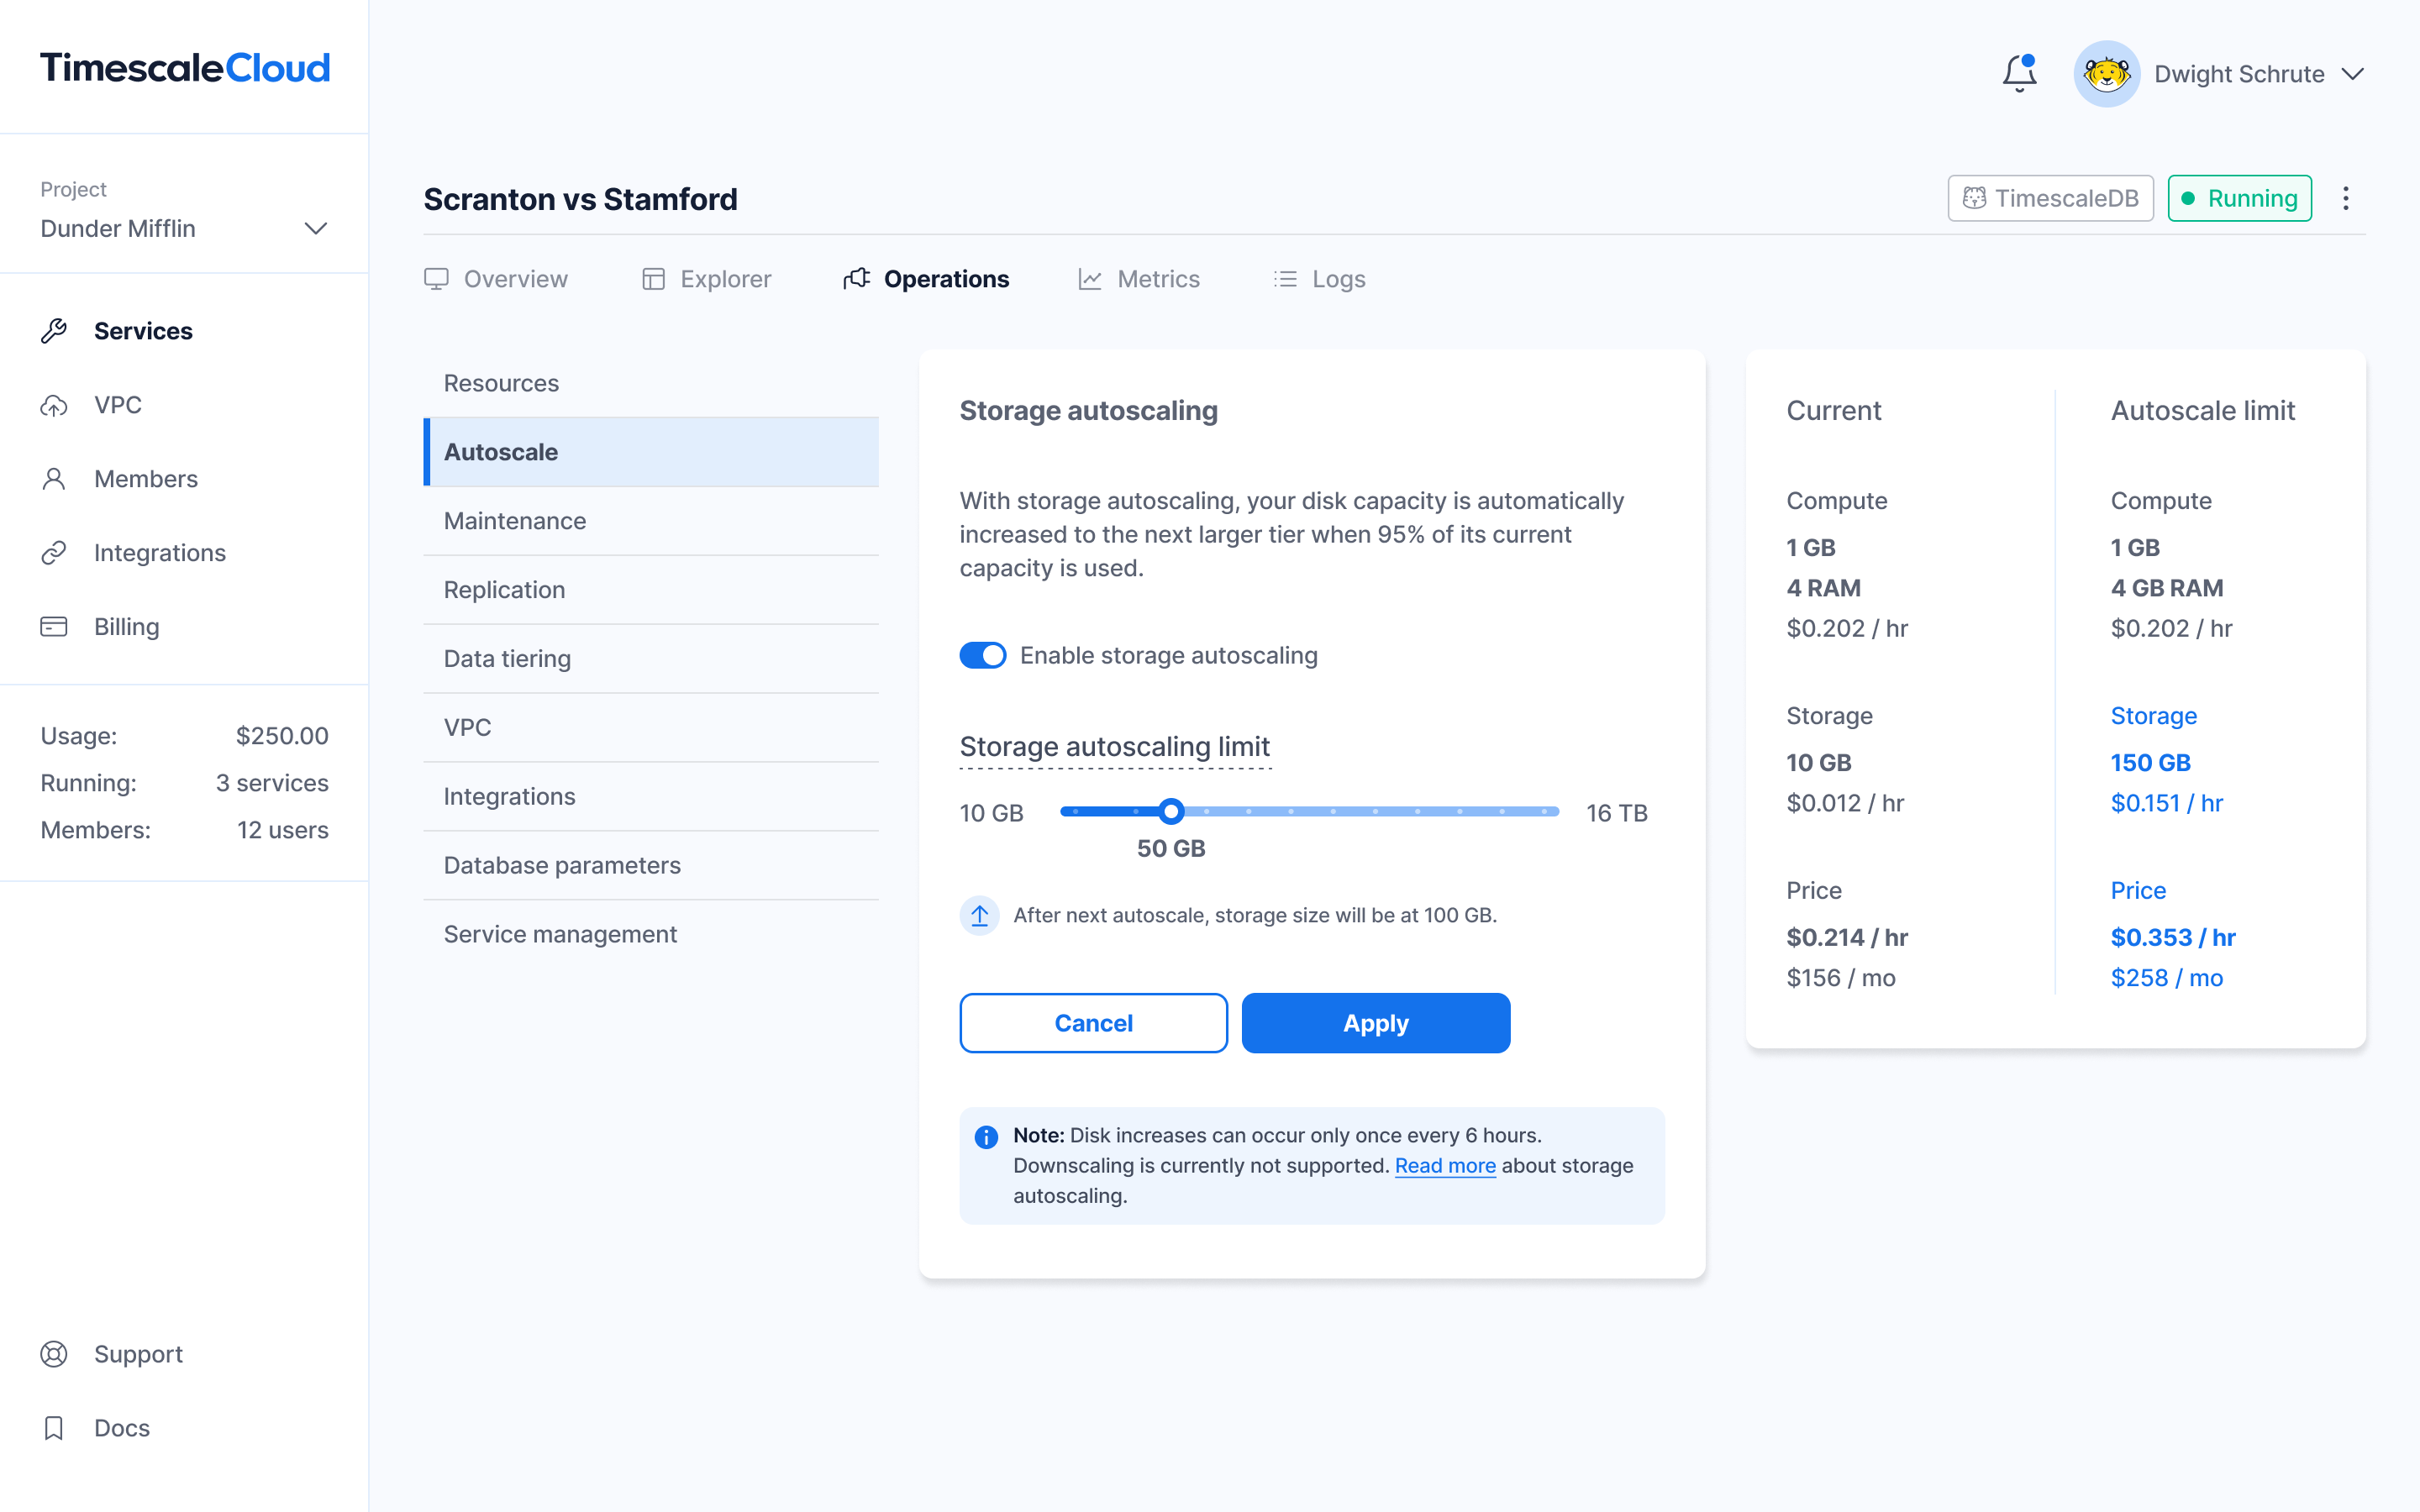 The Autoscale page of the new Timescale Cloud UI—built for a better developer experience